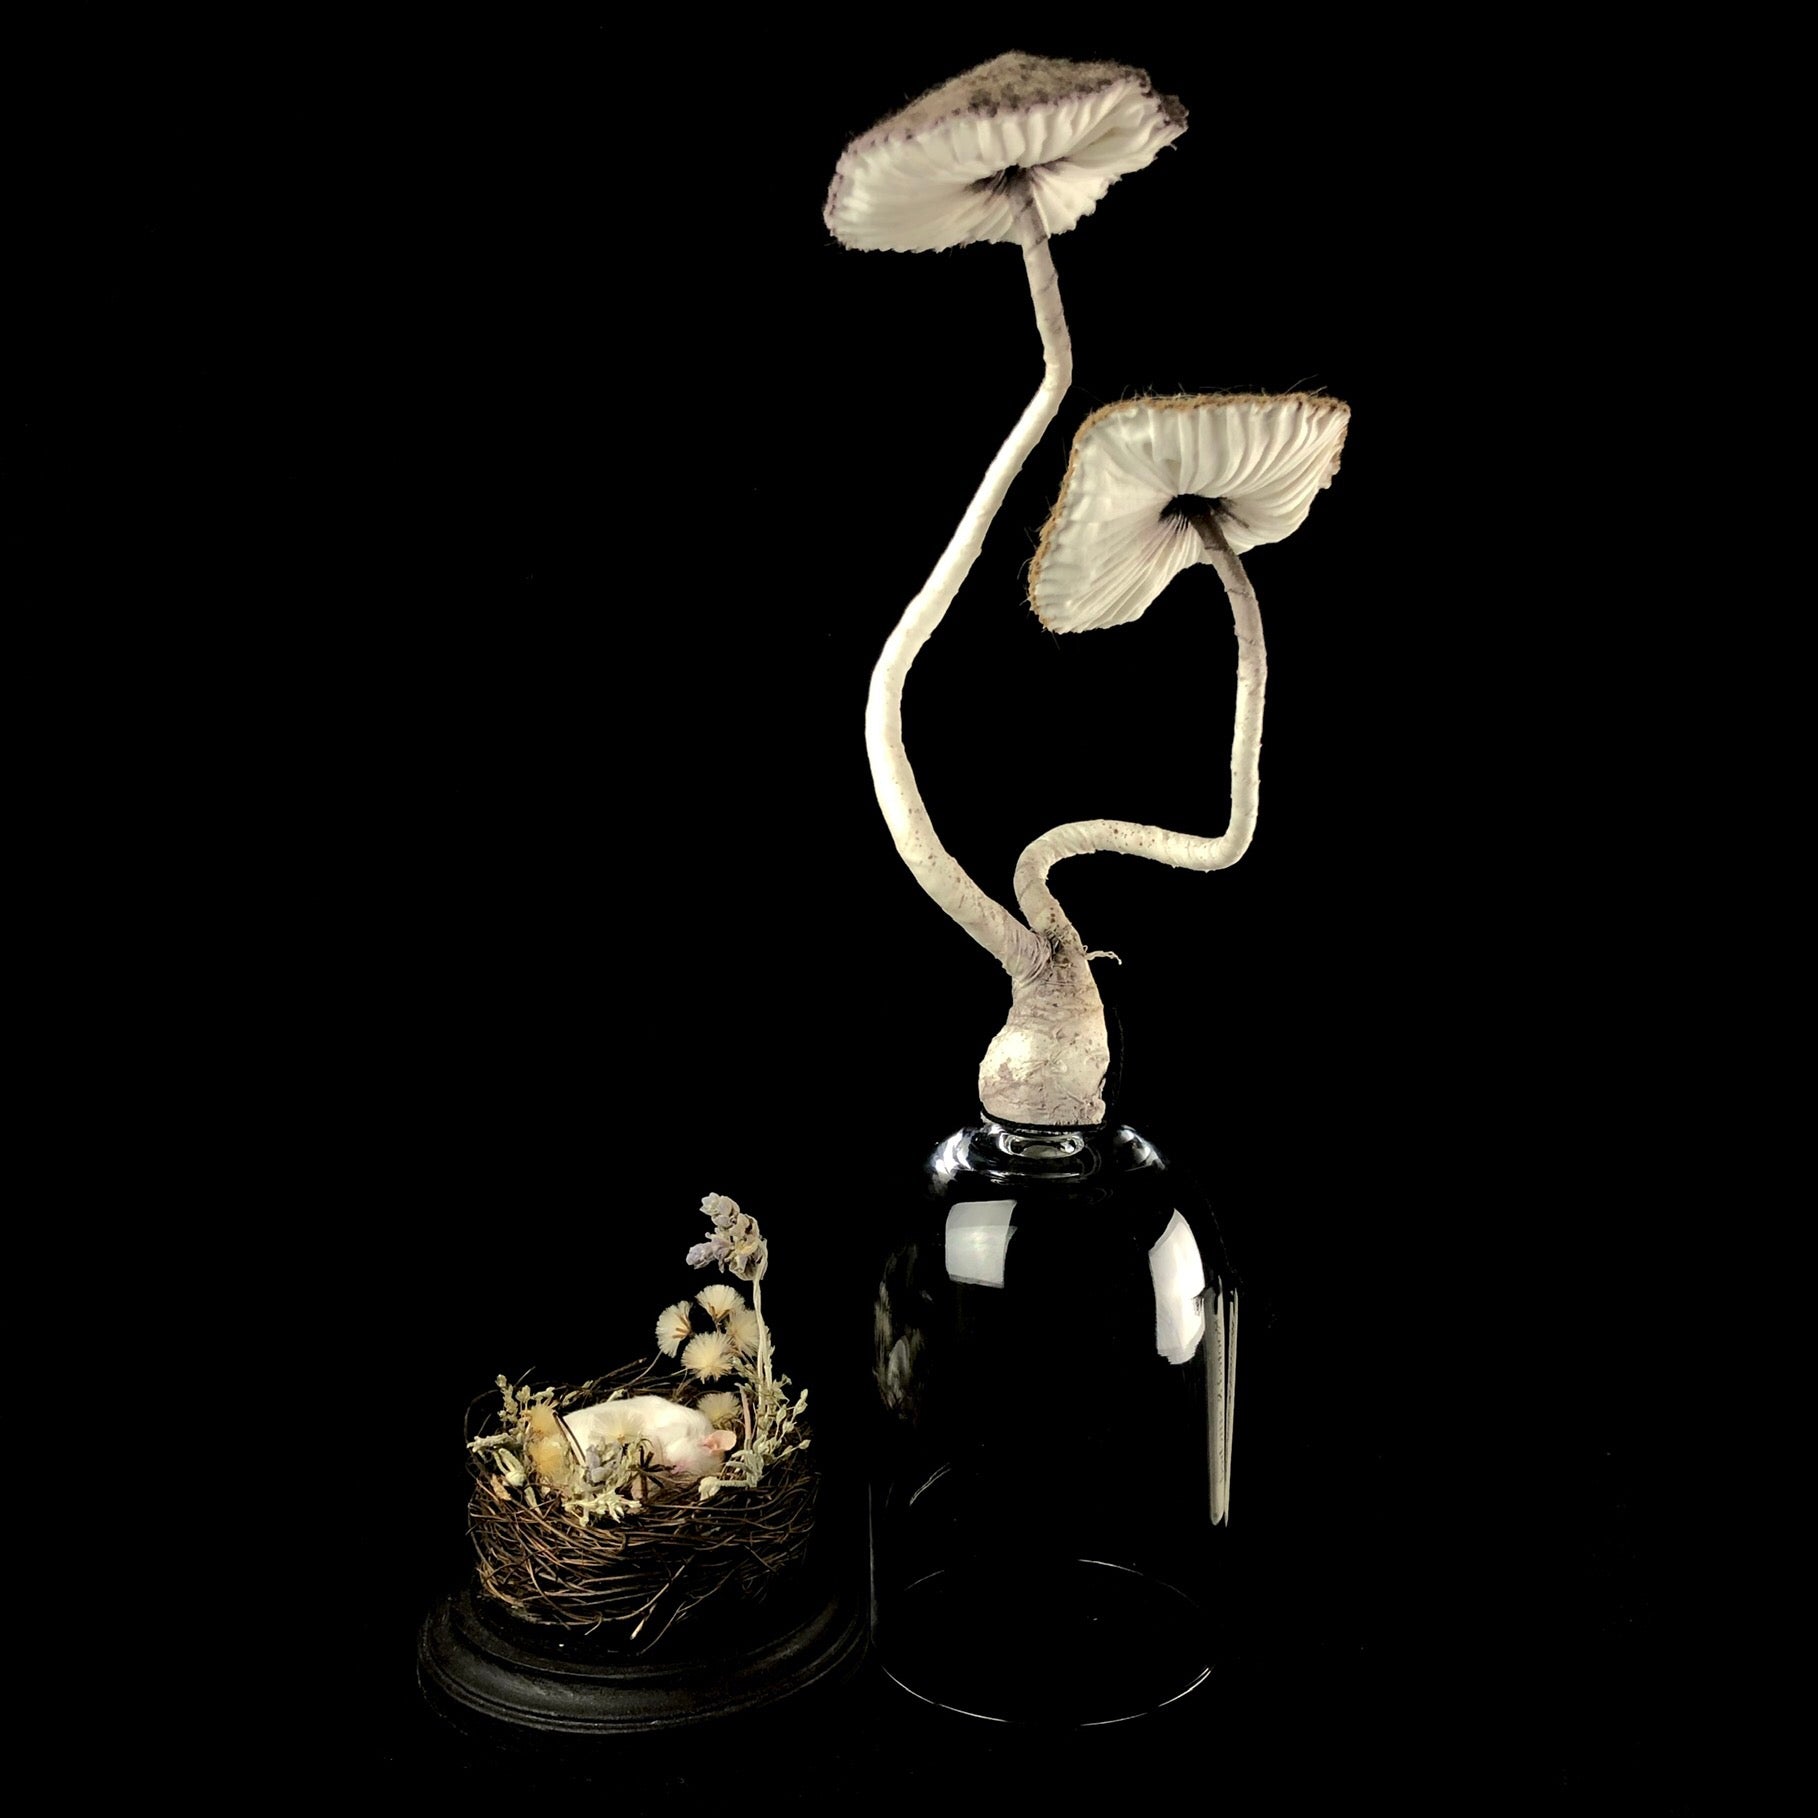 Glass lid with mushrooms removed from base with mouse sculpture sitting side by side